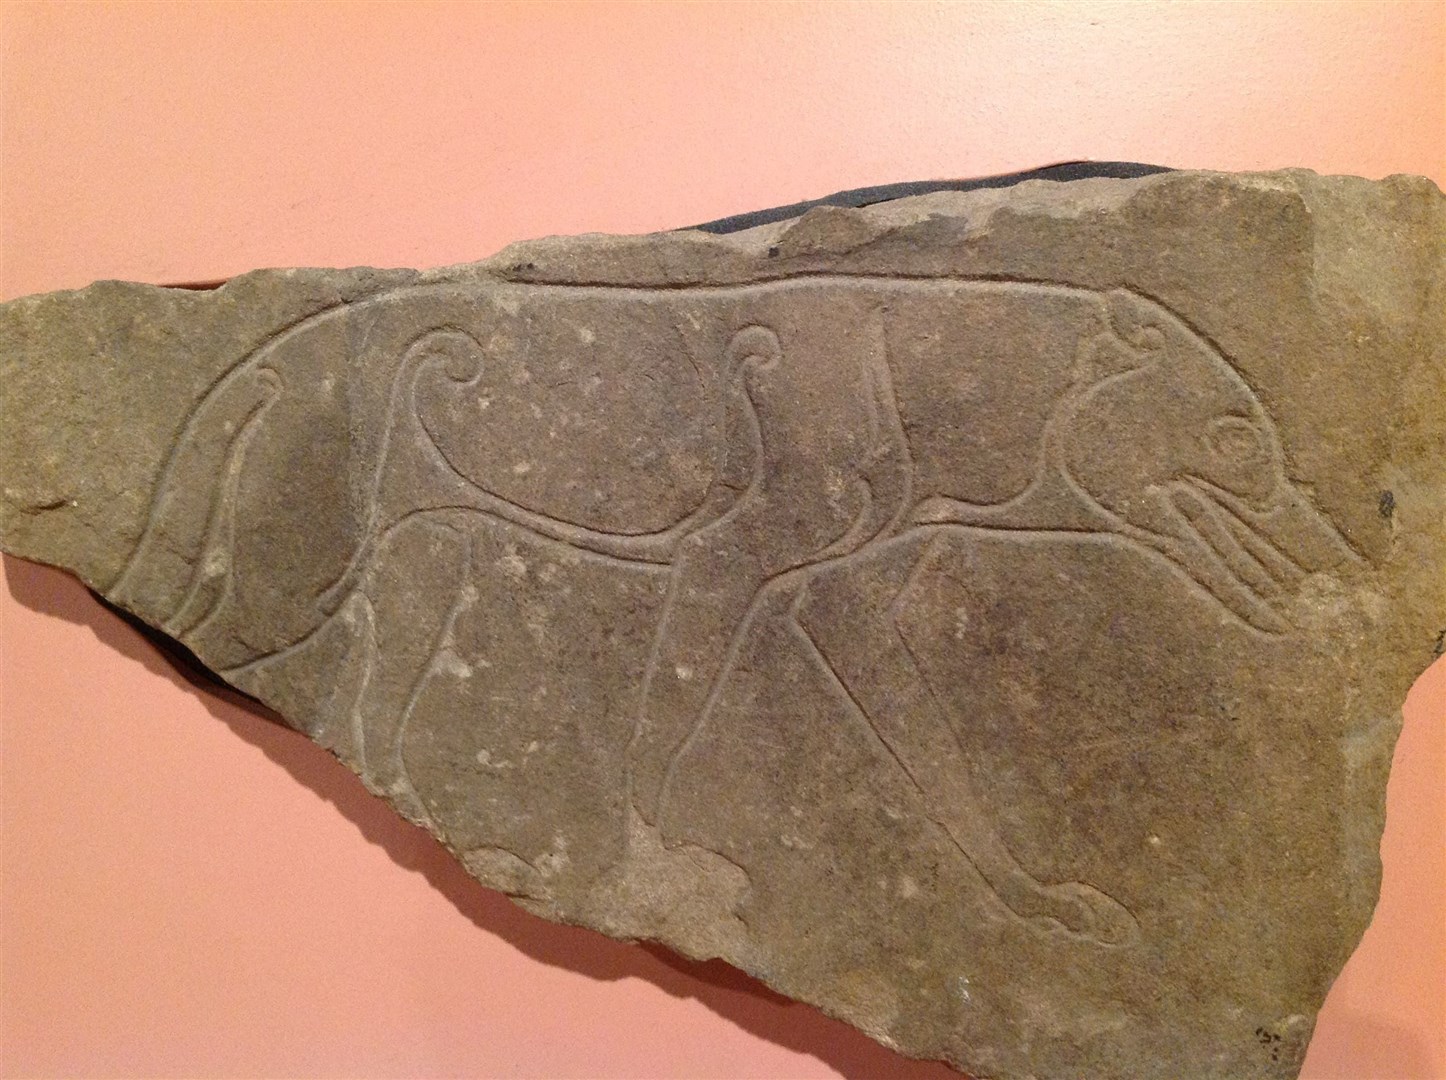 A piece of Pictish art, known as the Ardross Wolf Stone, is an important part of the area's rich heritage.